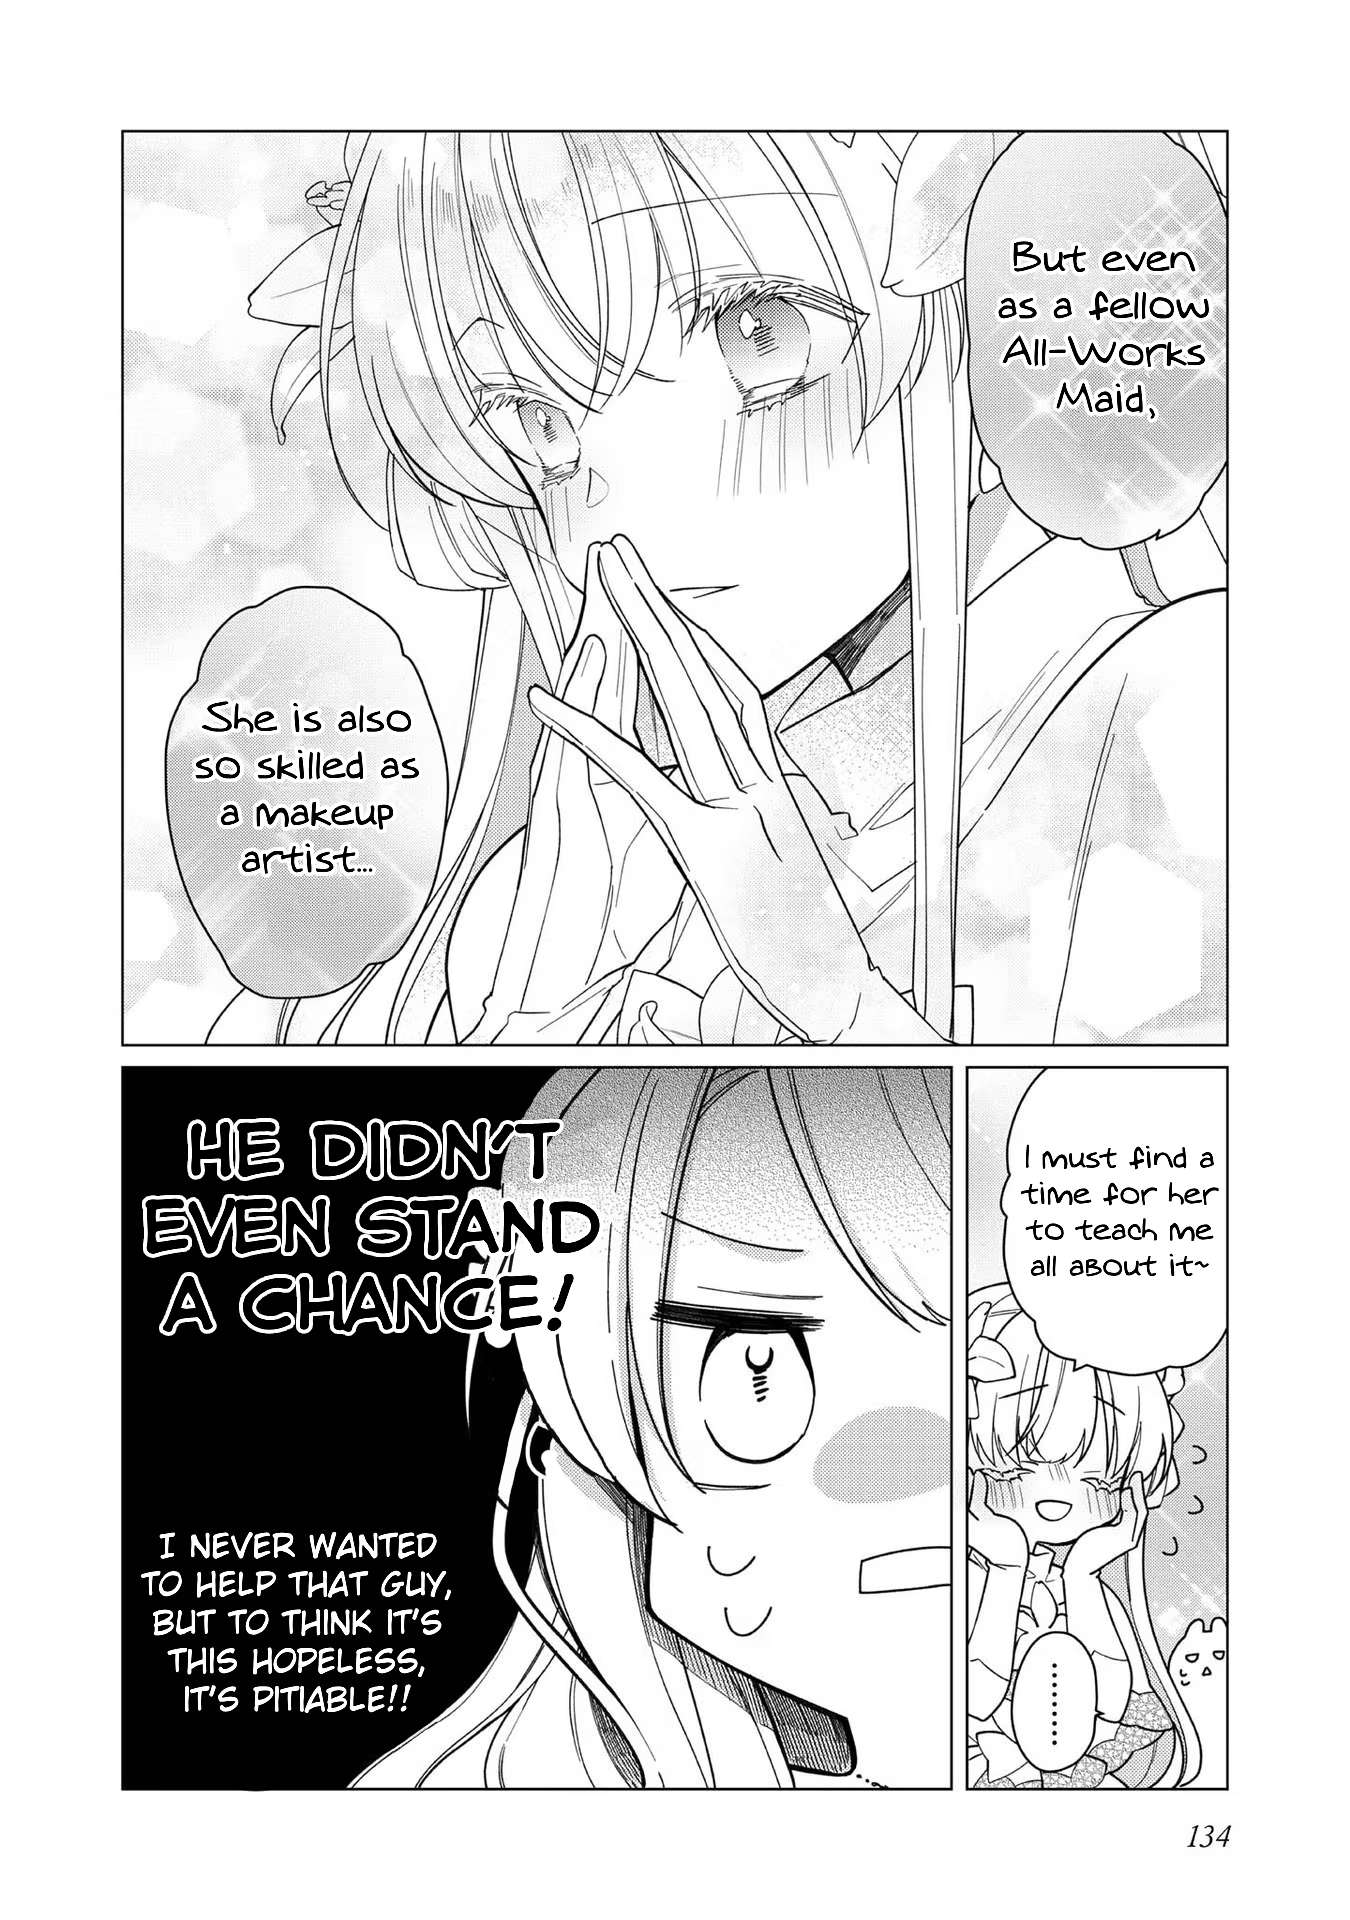 Heroine? Saint? No, I'm an All-Works Maid (Proud)! - chapter 10 - #6